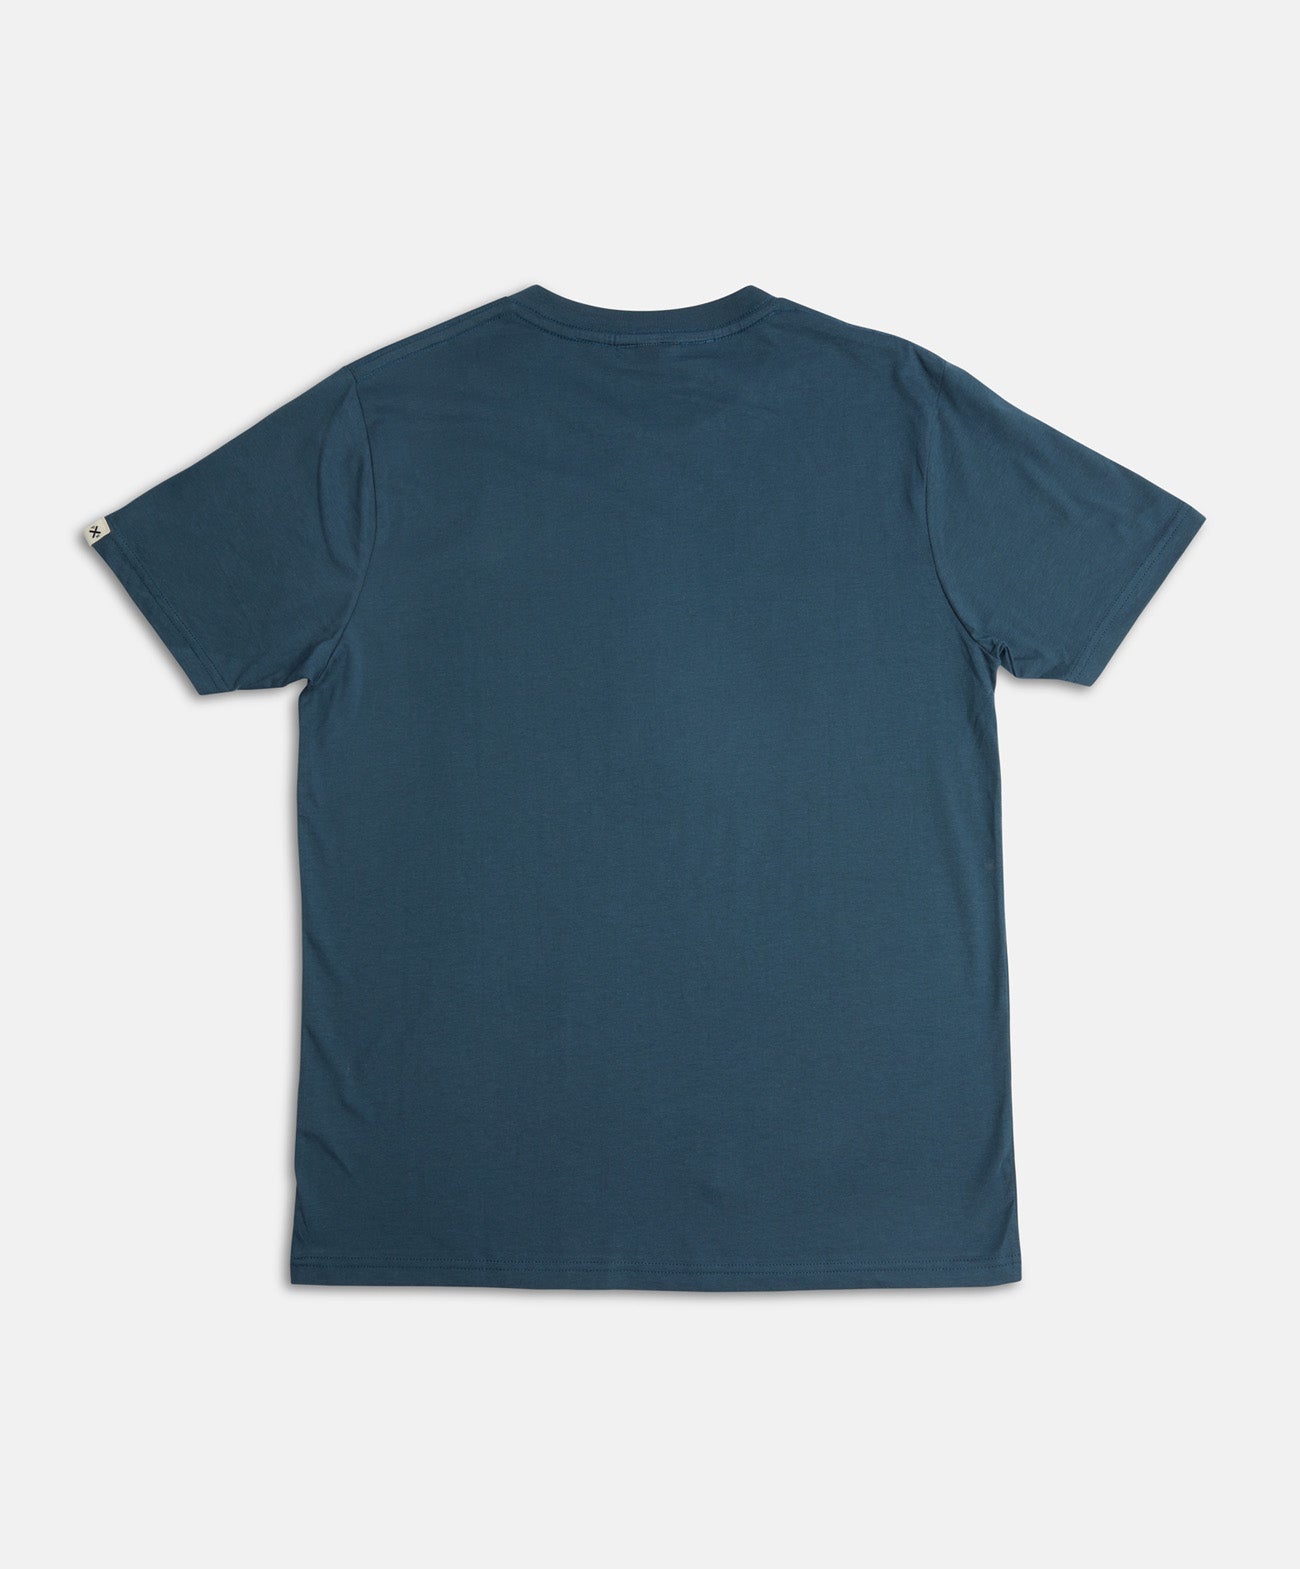 National Project Tee | Petrol Blue